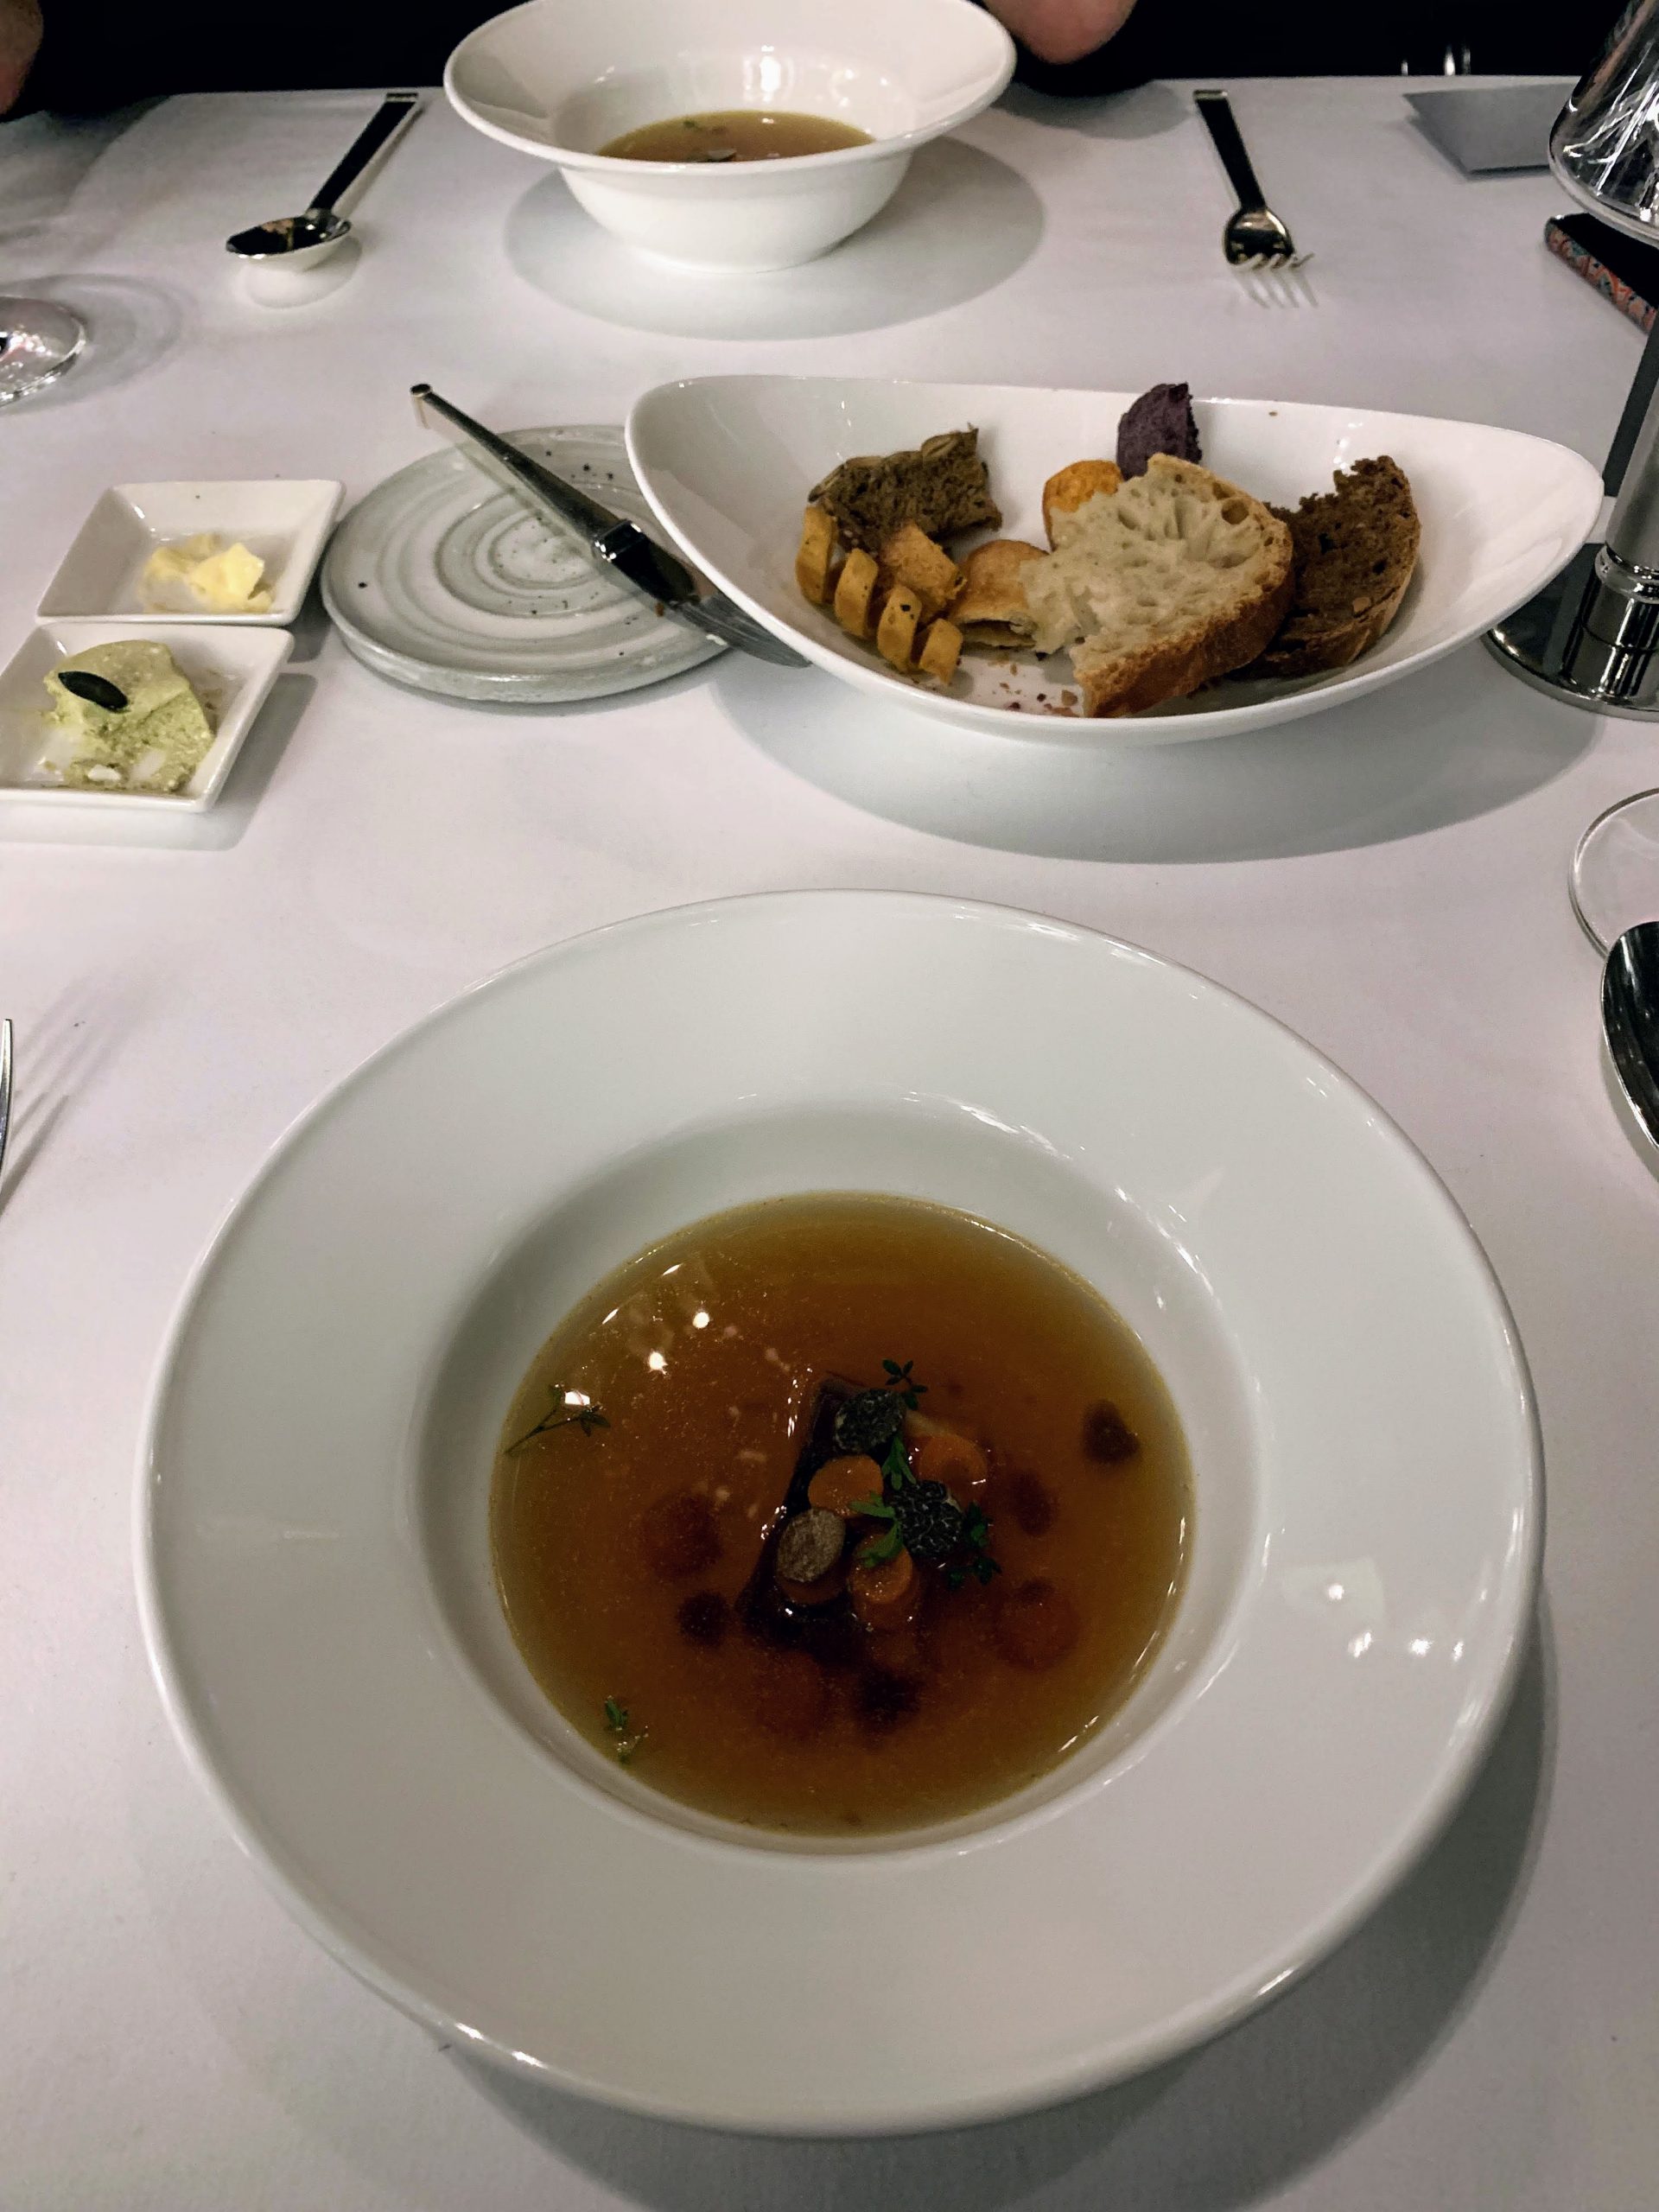 Rooster consommé